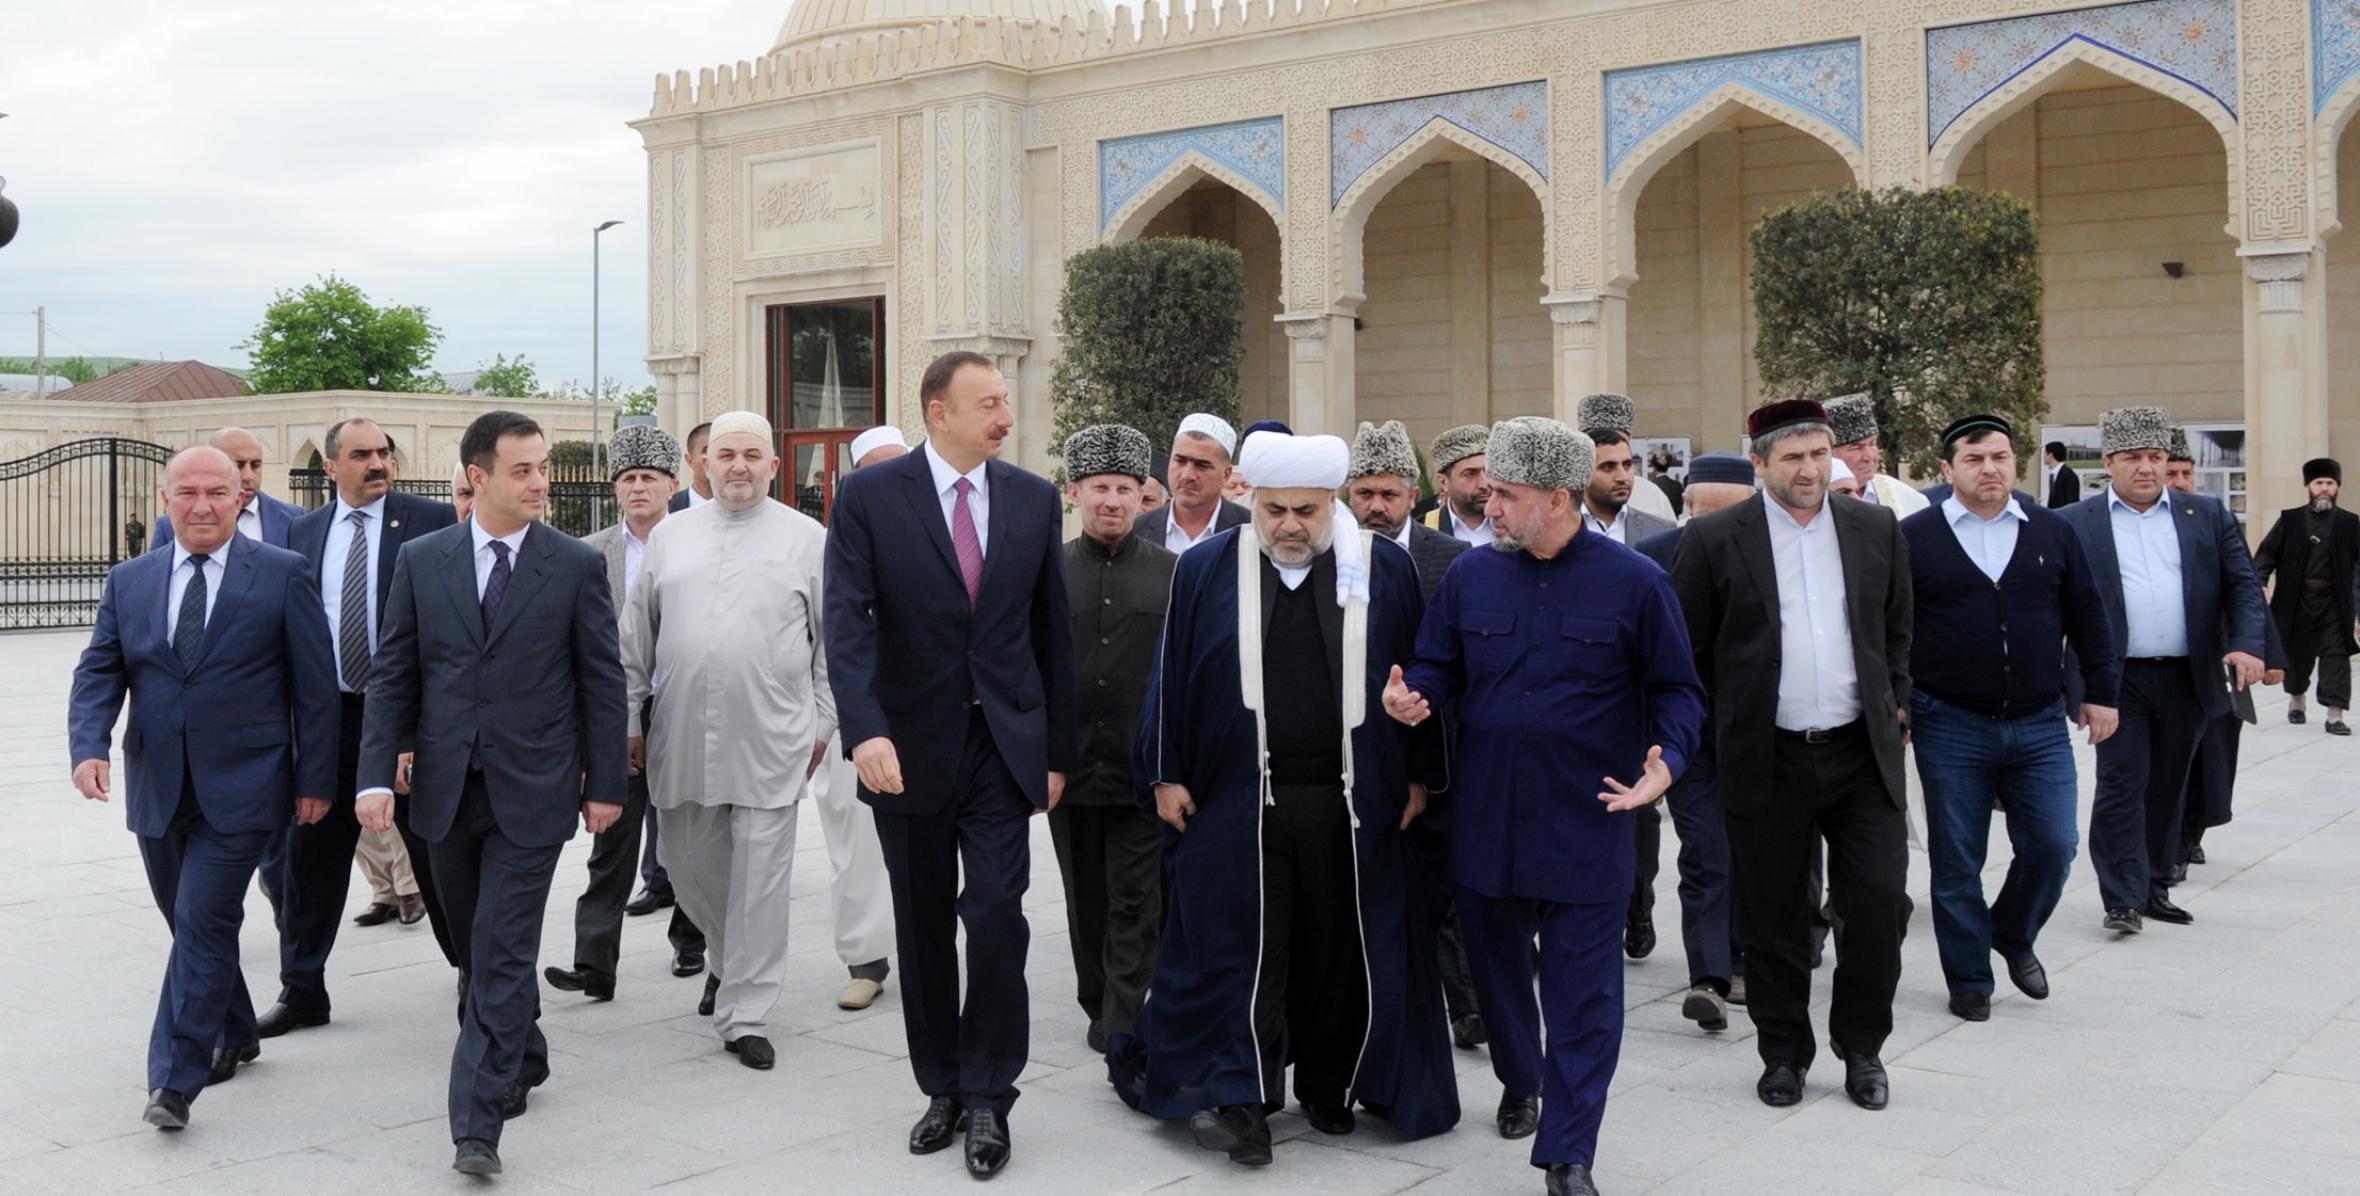 Ilham Aliyev attended the opening ceremony of the Juma Mosque in Shamakhi